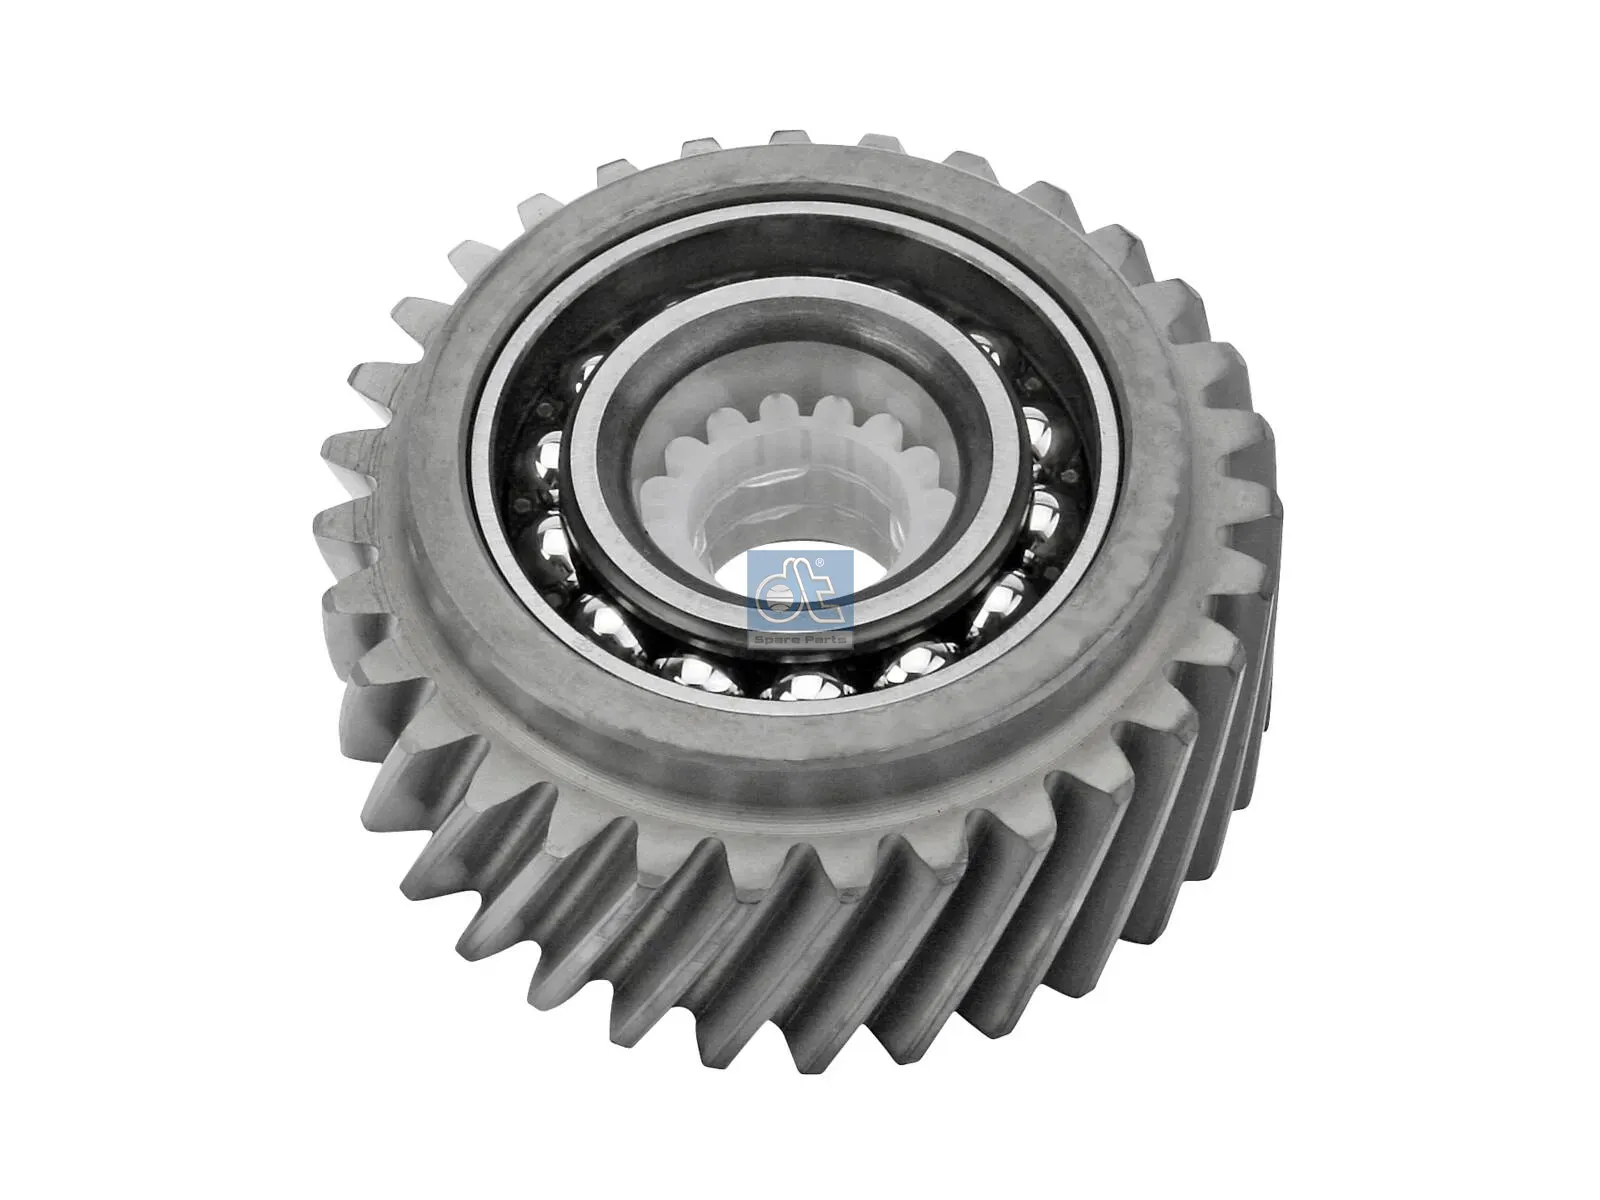 Gear, complete with bearing